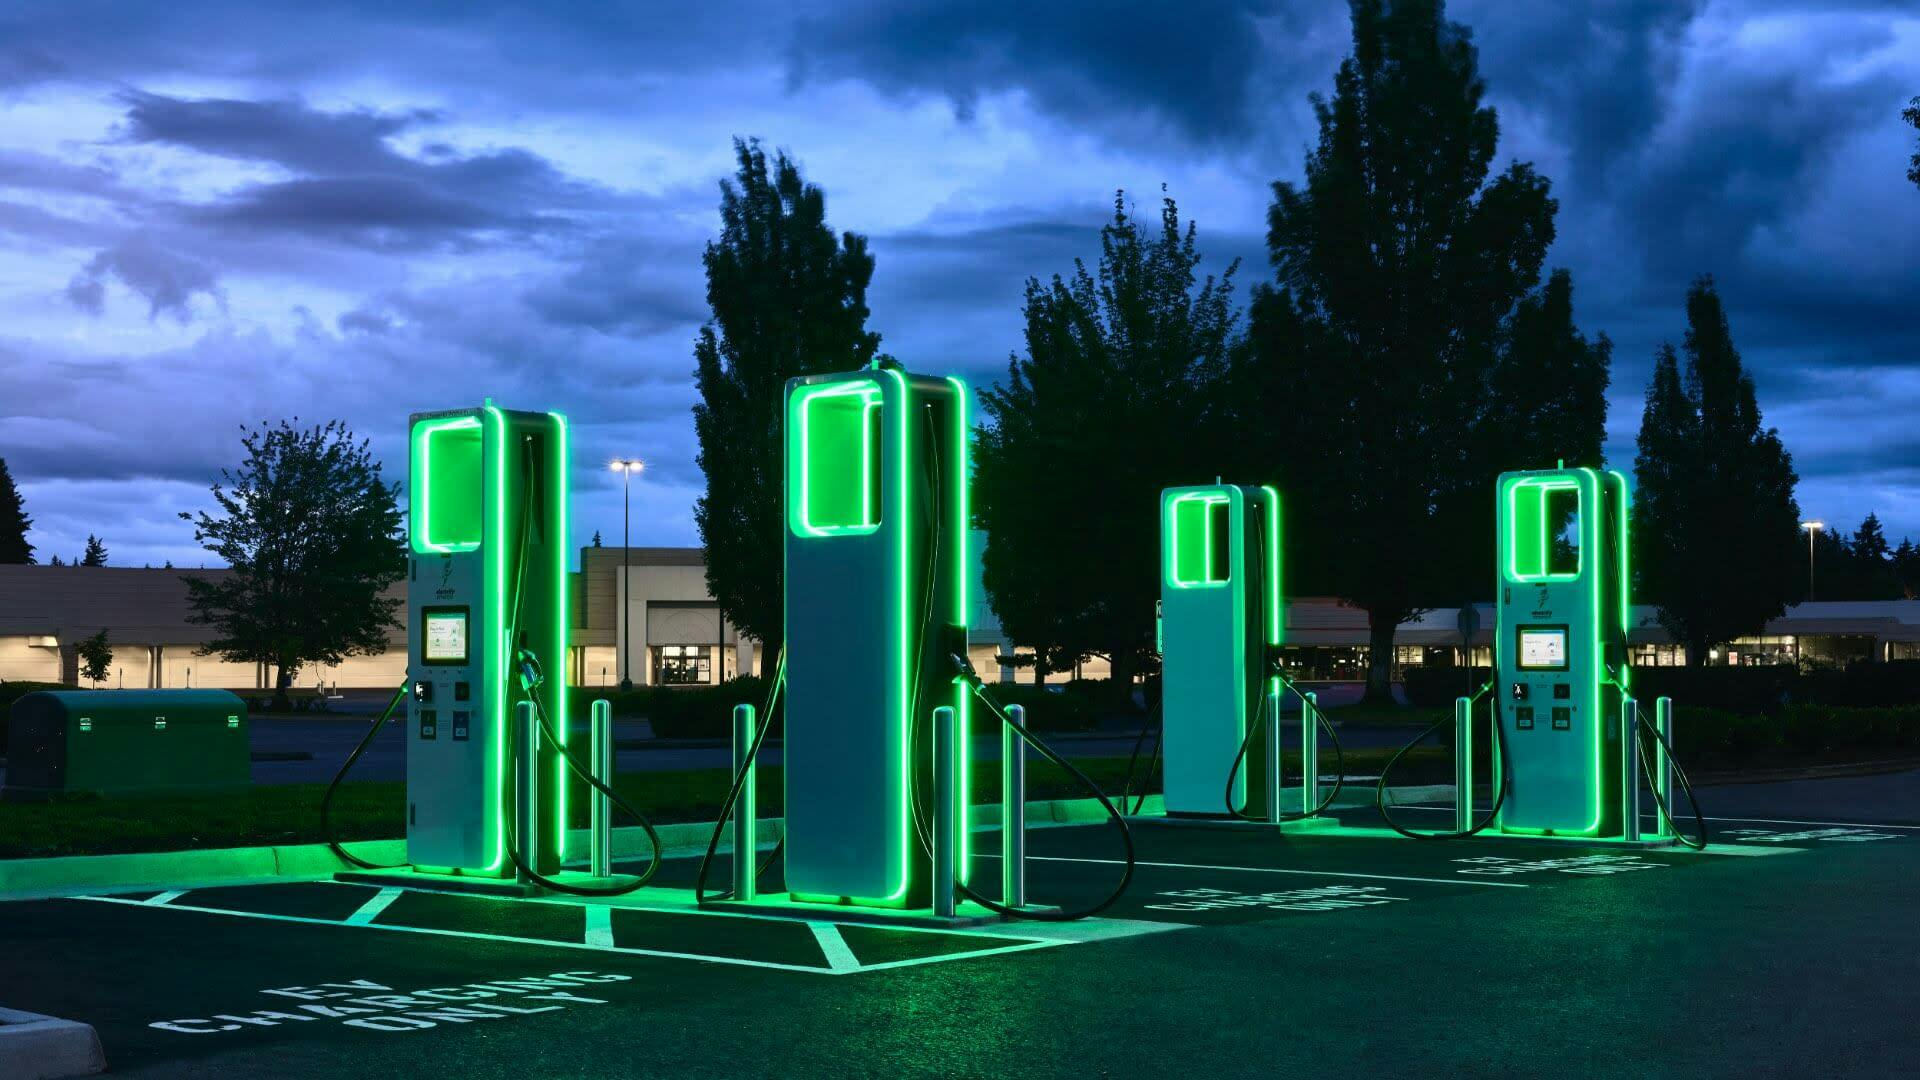 Finished project where electric car charges were installed, now fully illuminated at dusk